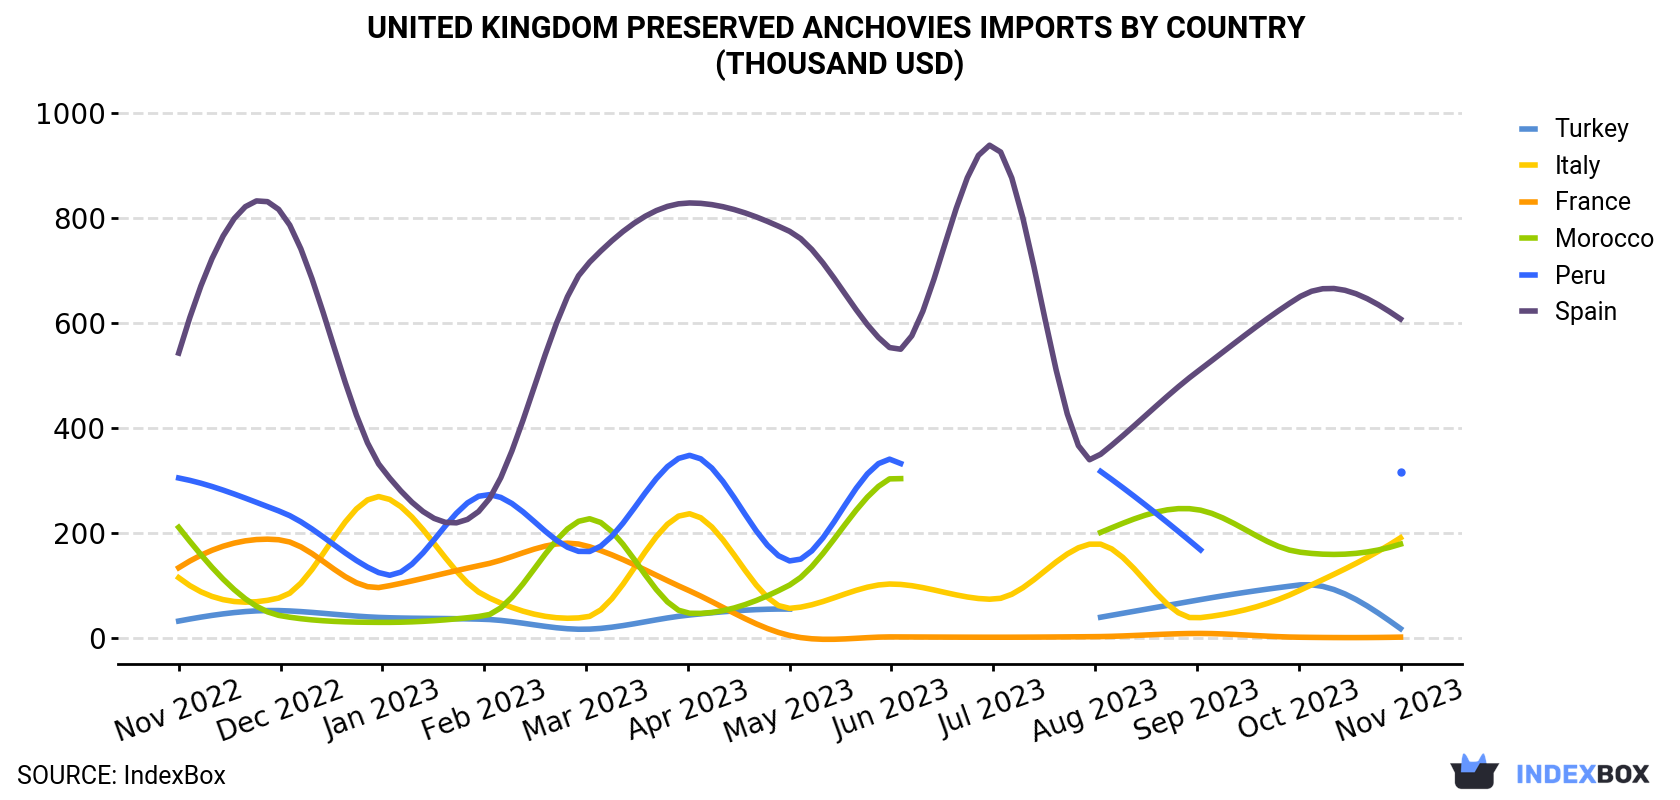 United Kingdom Preserved Anchovies Imports By Country (Thousand USD)